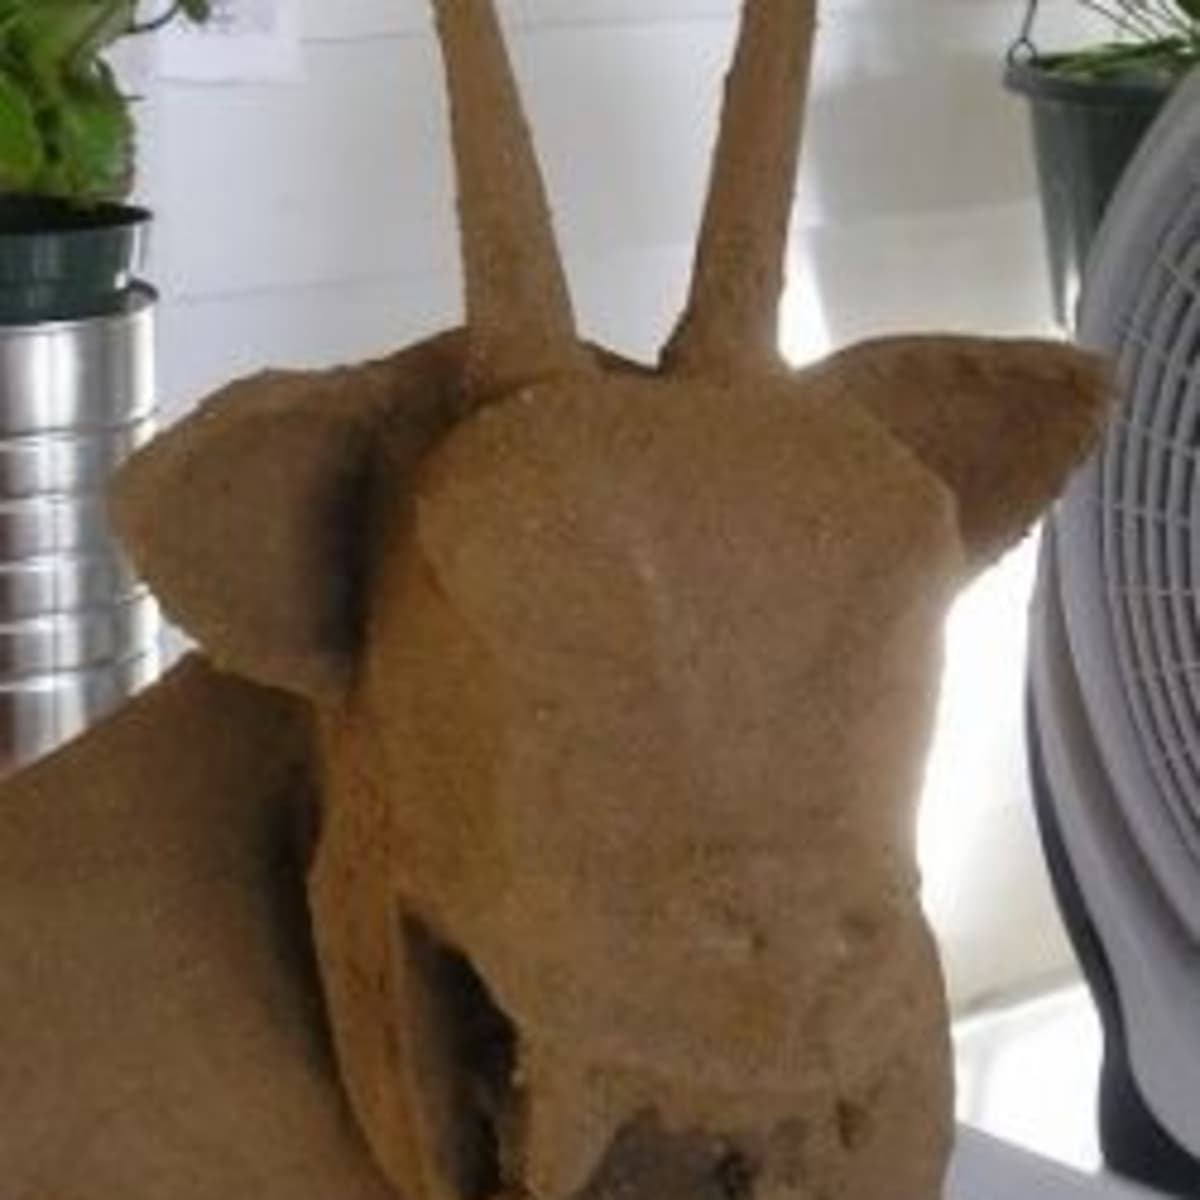 How to make clay, Paper clay, paper mache